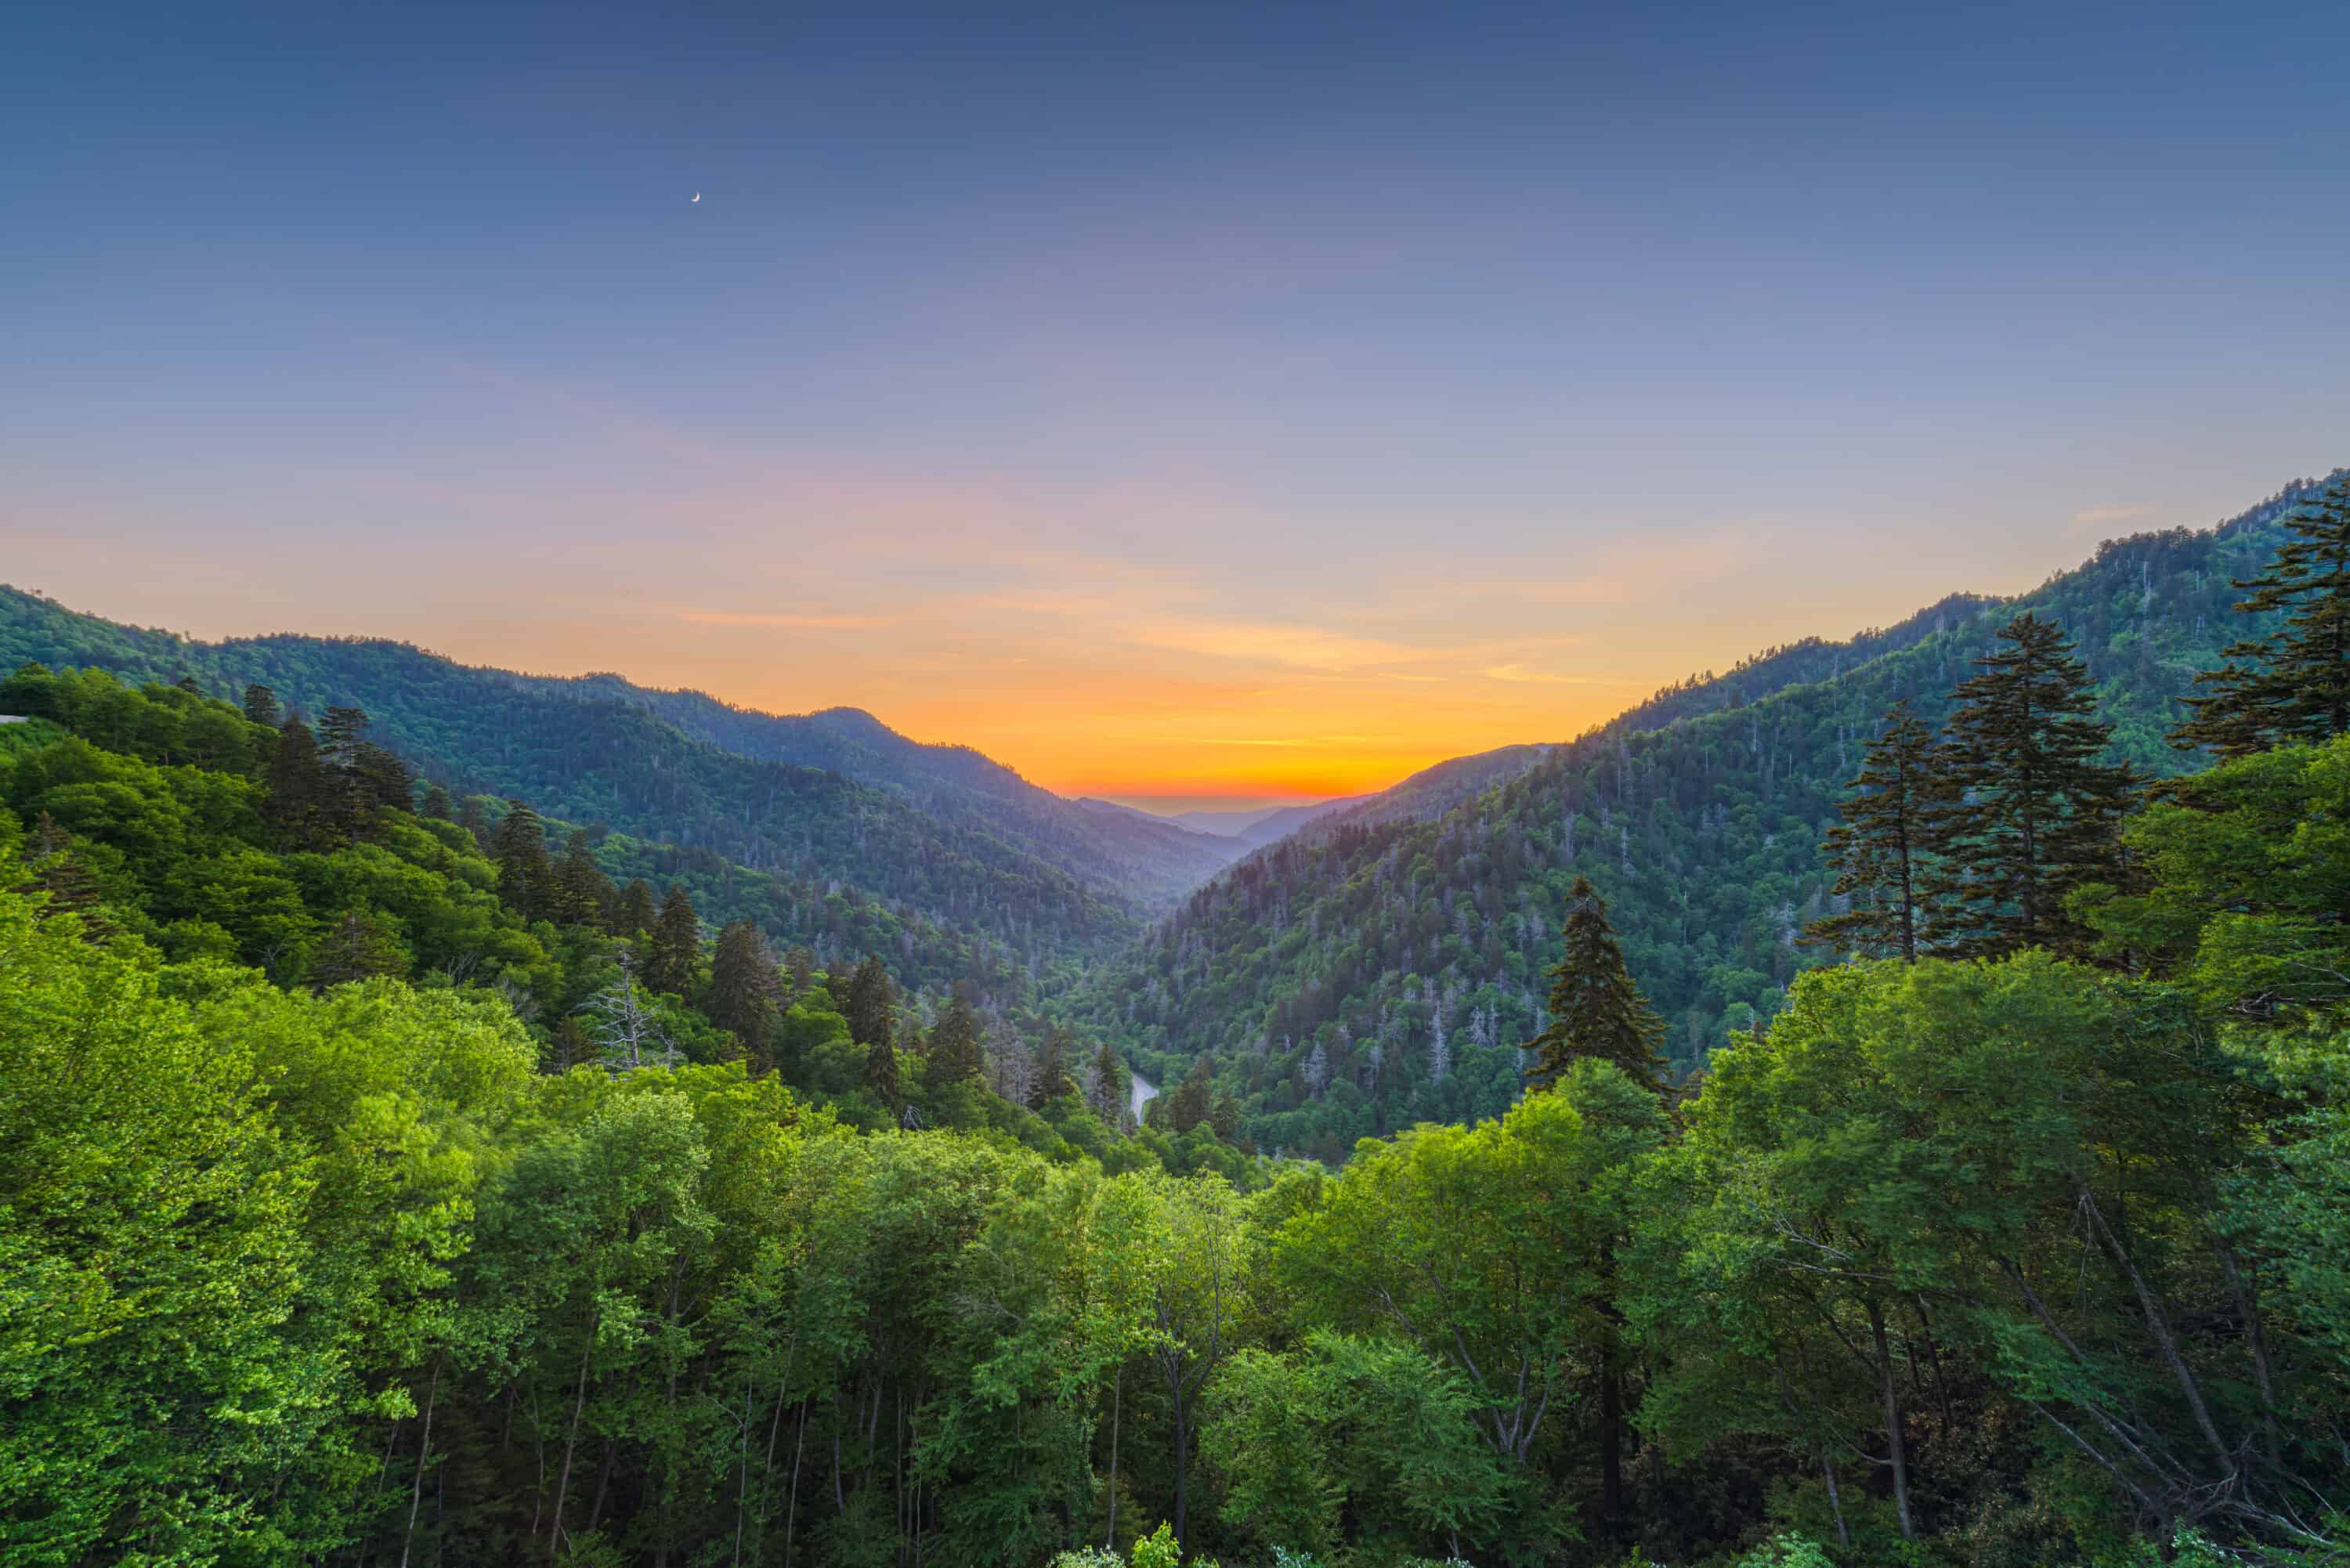 Sunset over the Newfound Gap in the Great Smoky Mountains, USA